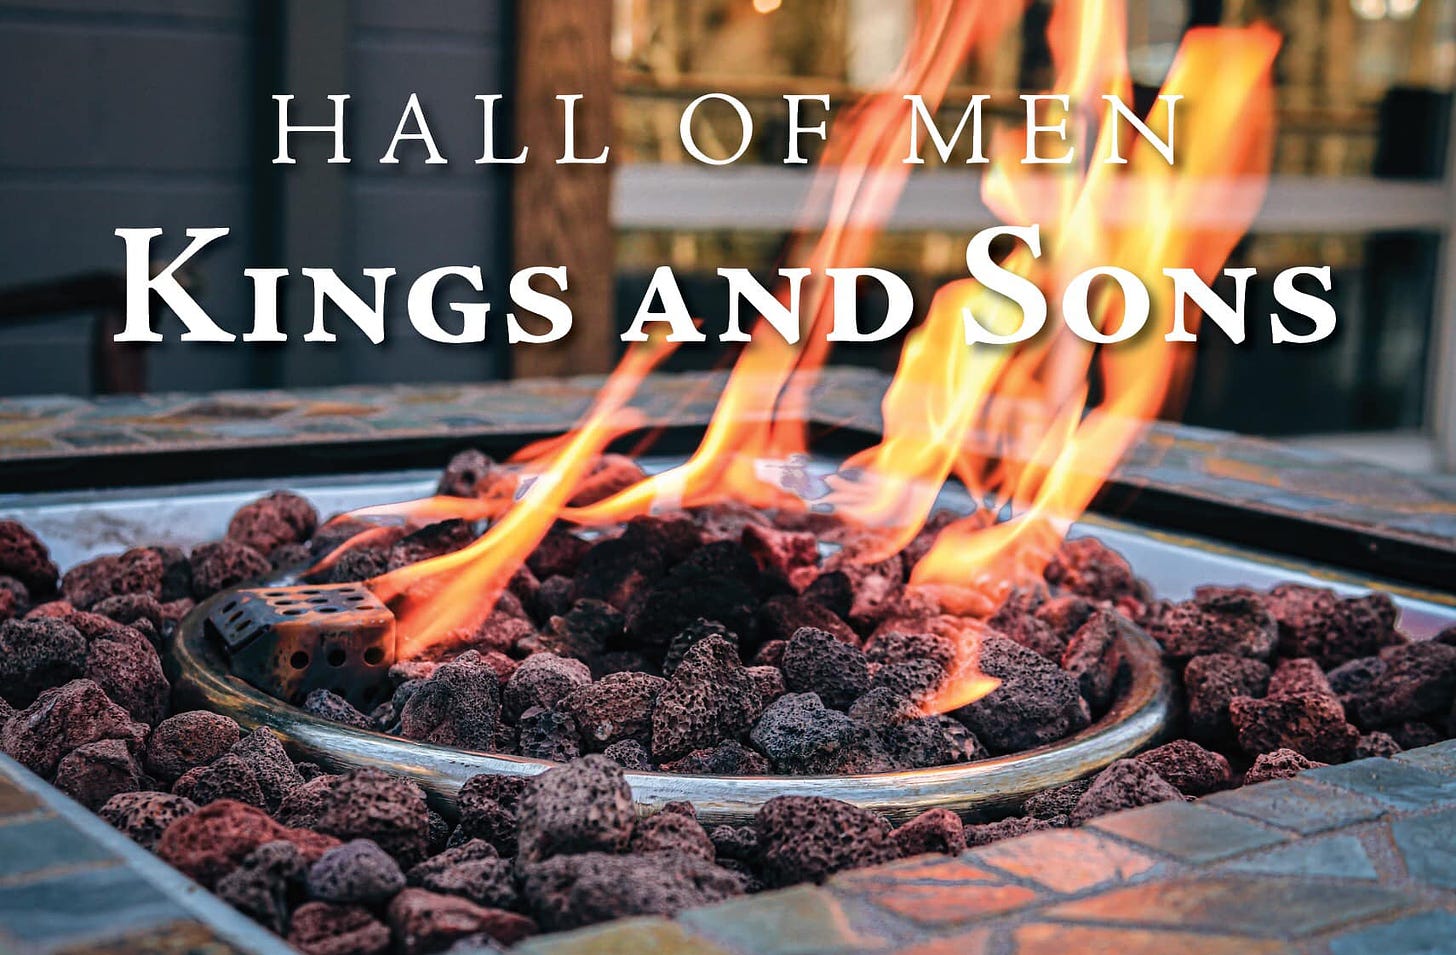 May be an image of fire, outdoors and text that says 'HALL OFMEN OF EN KINGS ÛDSO'